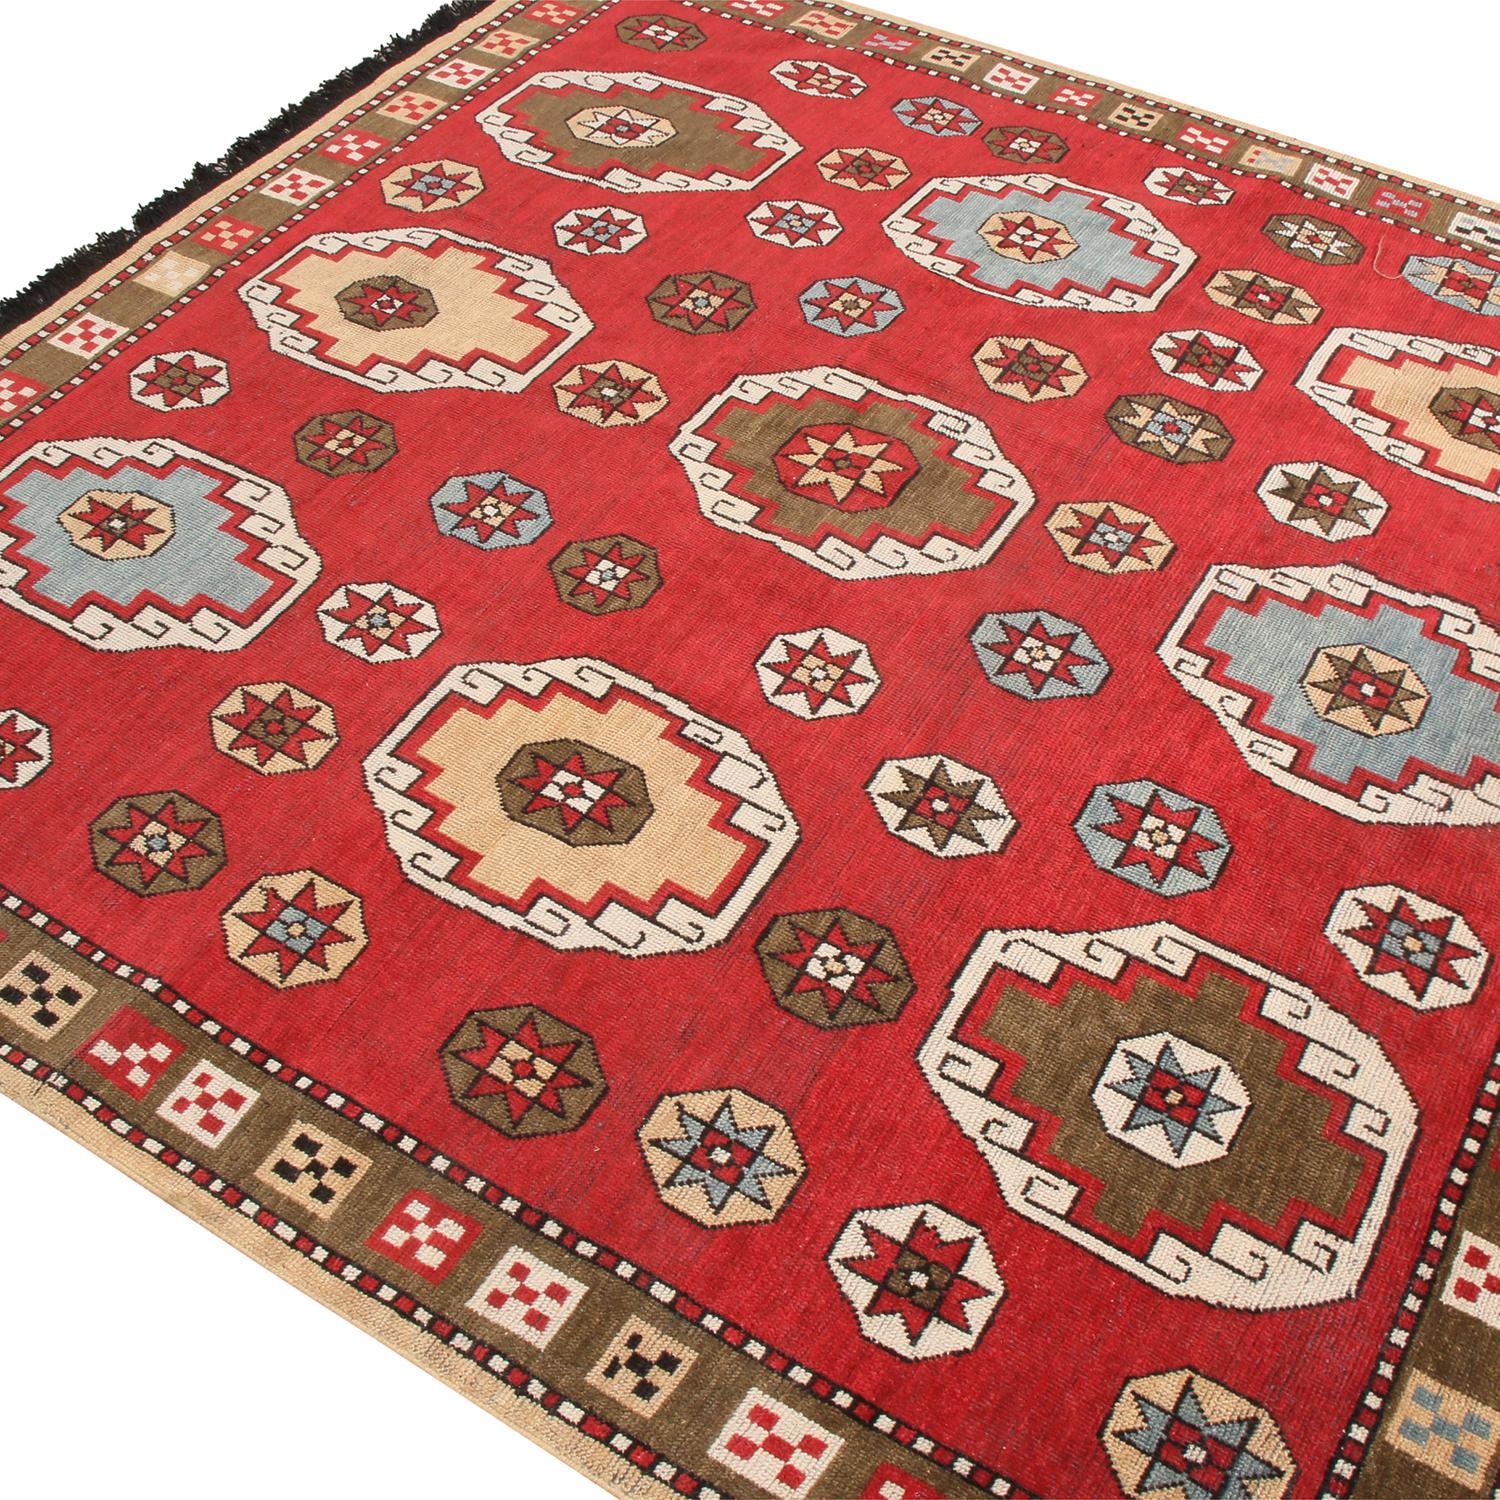 Hand knotted with high-quality wool in India, this square rug originates from Rug & Kilim’s premier Burano collection, a bold and storied piece enjoying a uniquely abrashed, rich crimson red background with balancing pastel yellow and blue hues